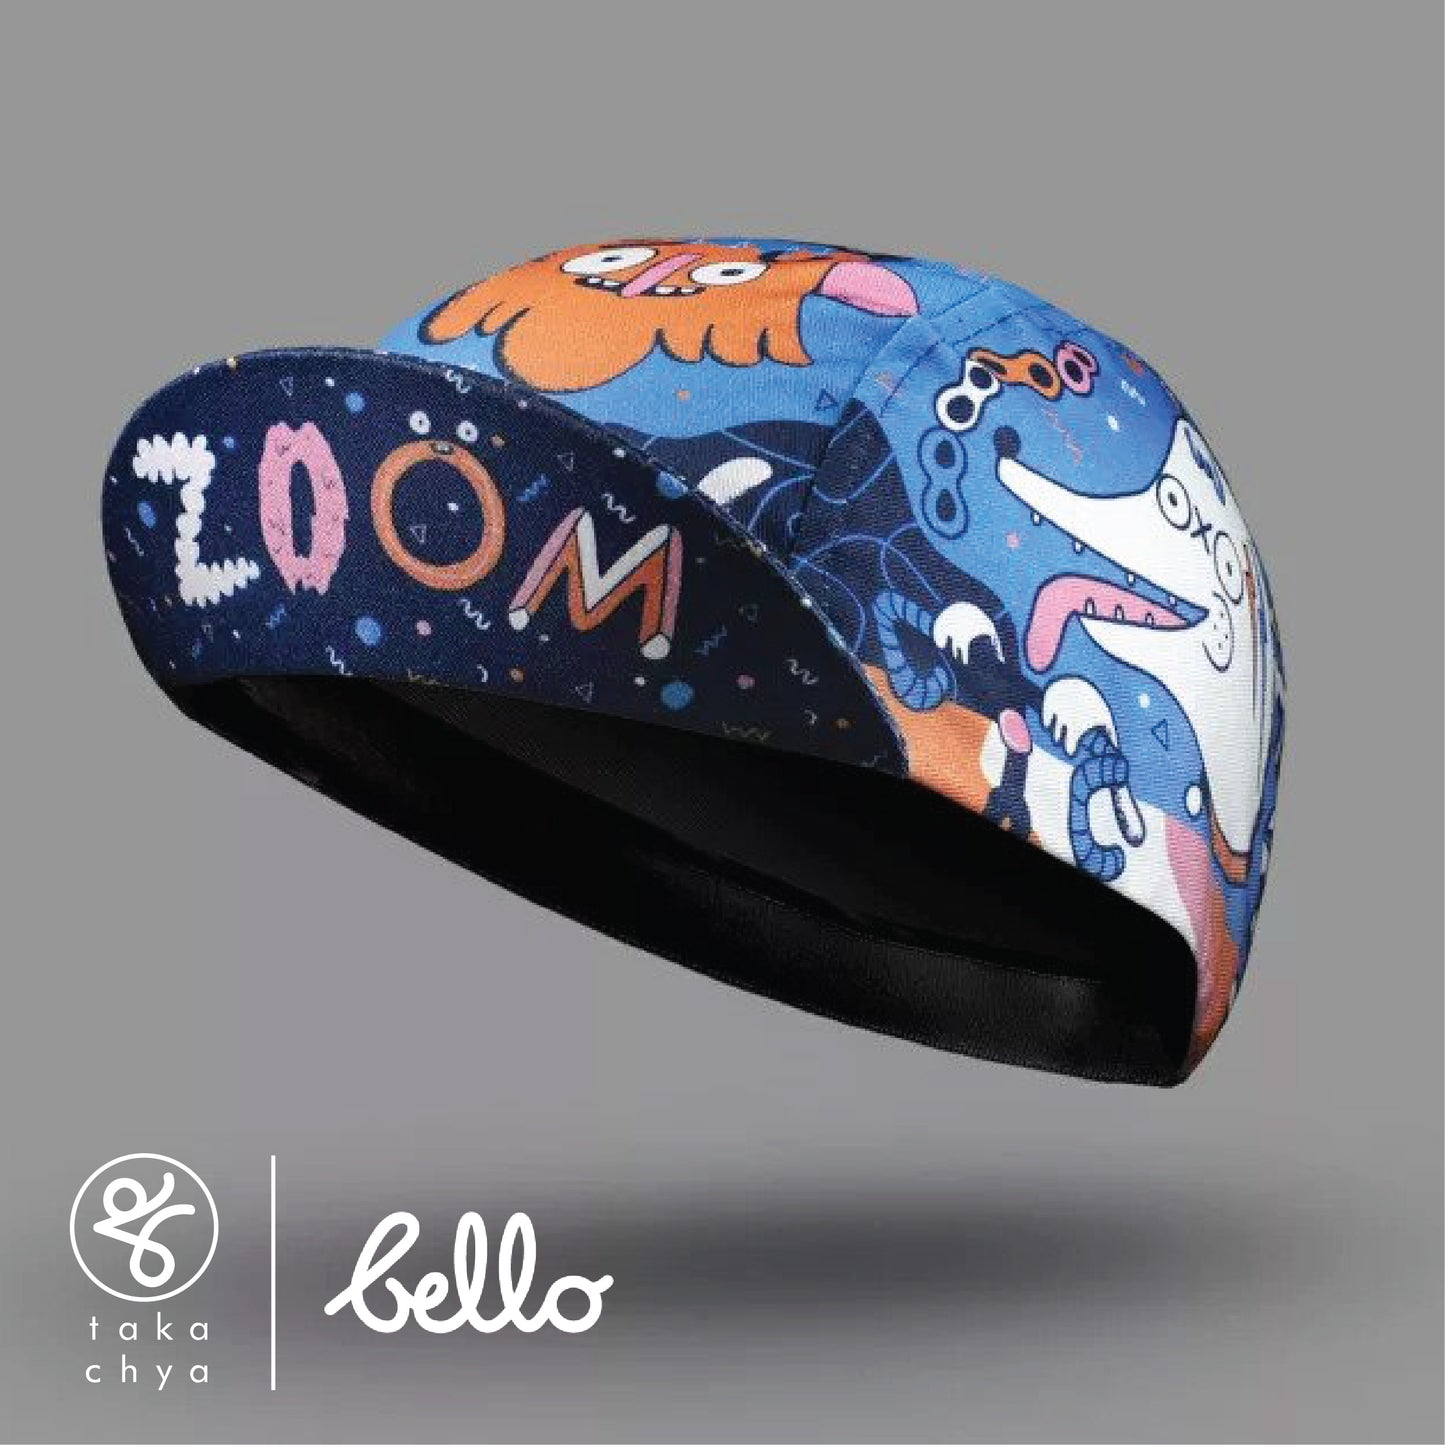 Zooooom! by CLÖ - Bello Cyclist Designer Collaboration Cycling Cap